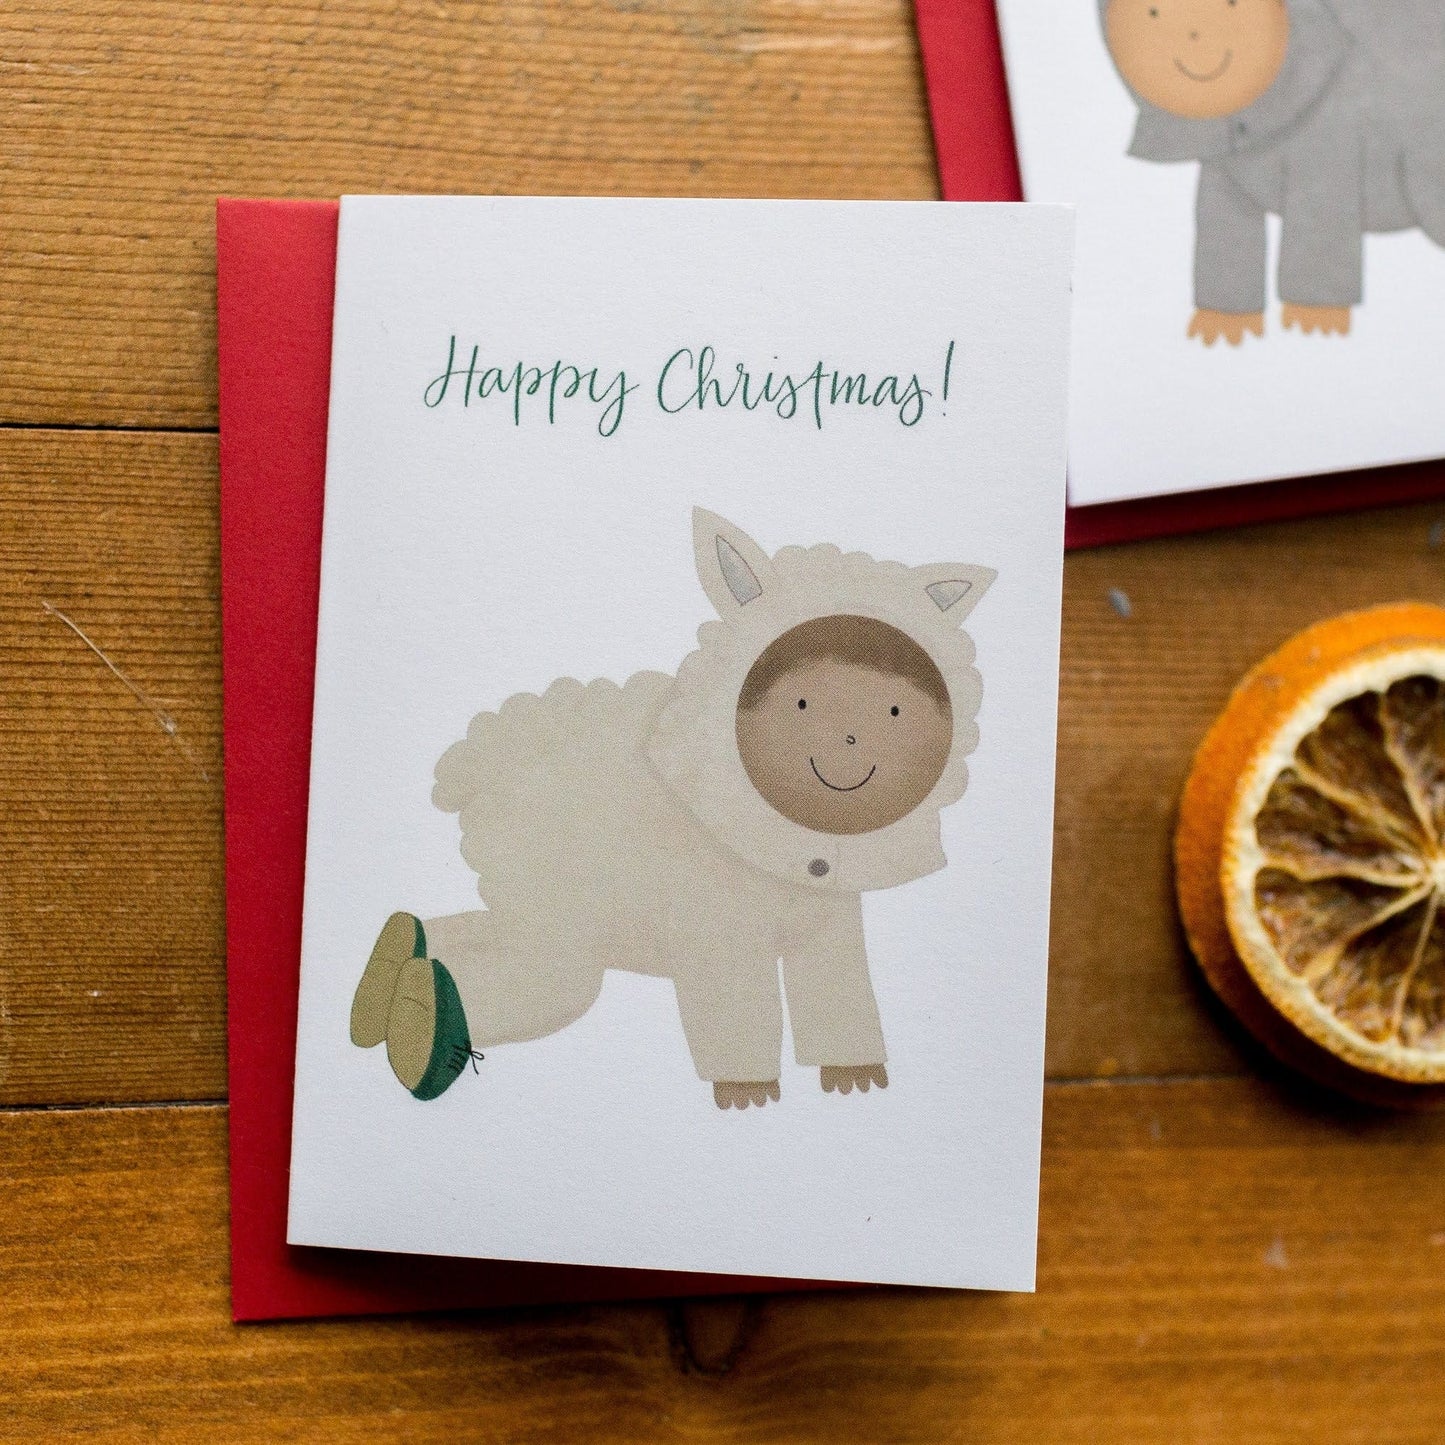 And Hope Designs Cards Small Christmas card packs - nativity characters